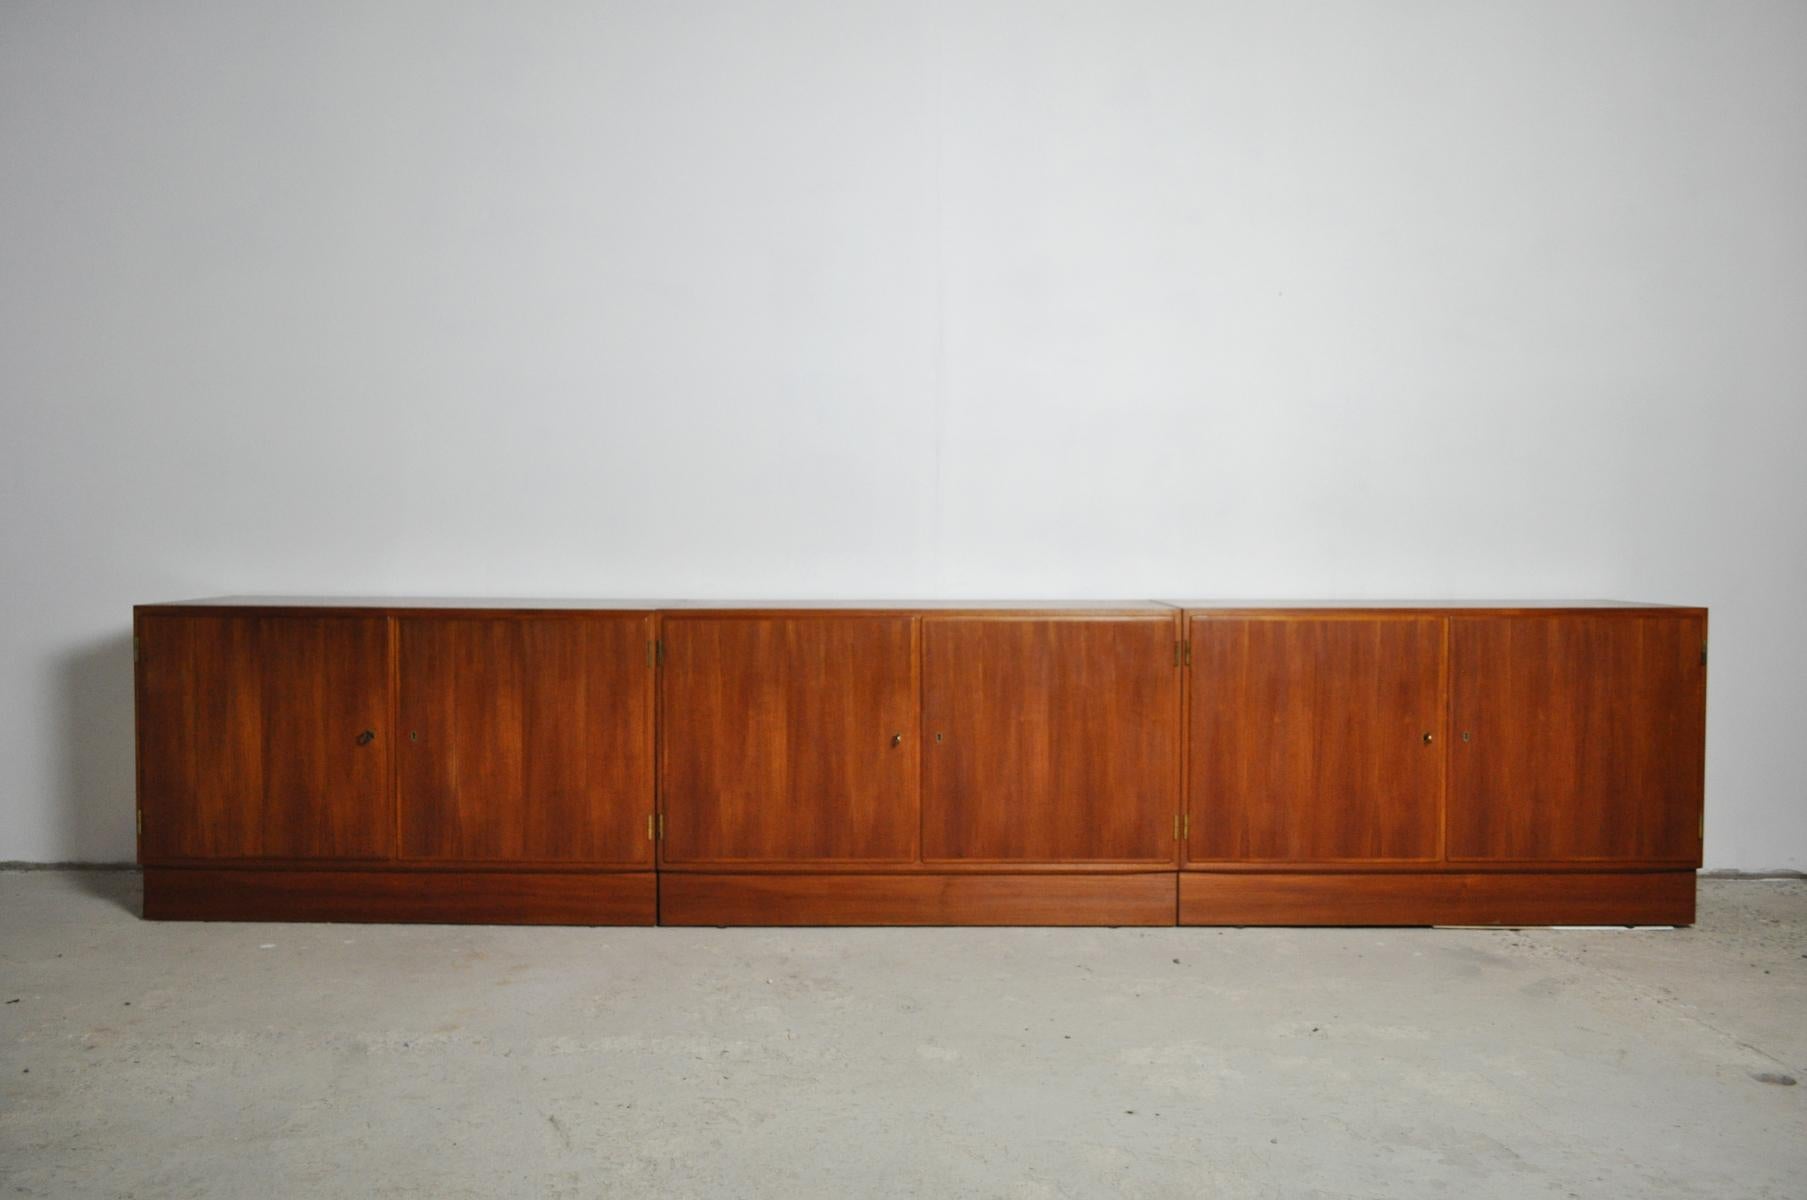 Three Danish teak cabinets/cupboards by Hundevad & Co. Made of veneered teak wood, fronts with each two doors. Set on sockets, these can be removed and legs can be fitted. Keys included.
Very fine craftsmanship as always from Hundevad.
Signs of